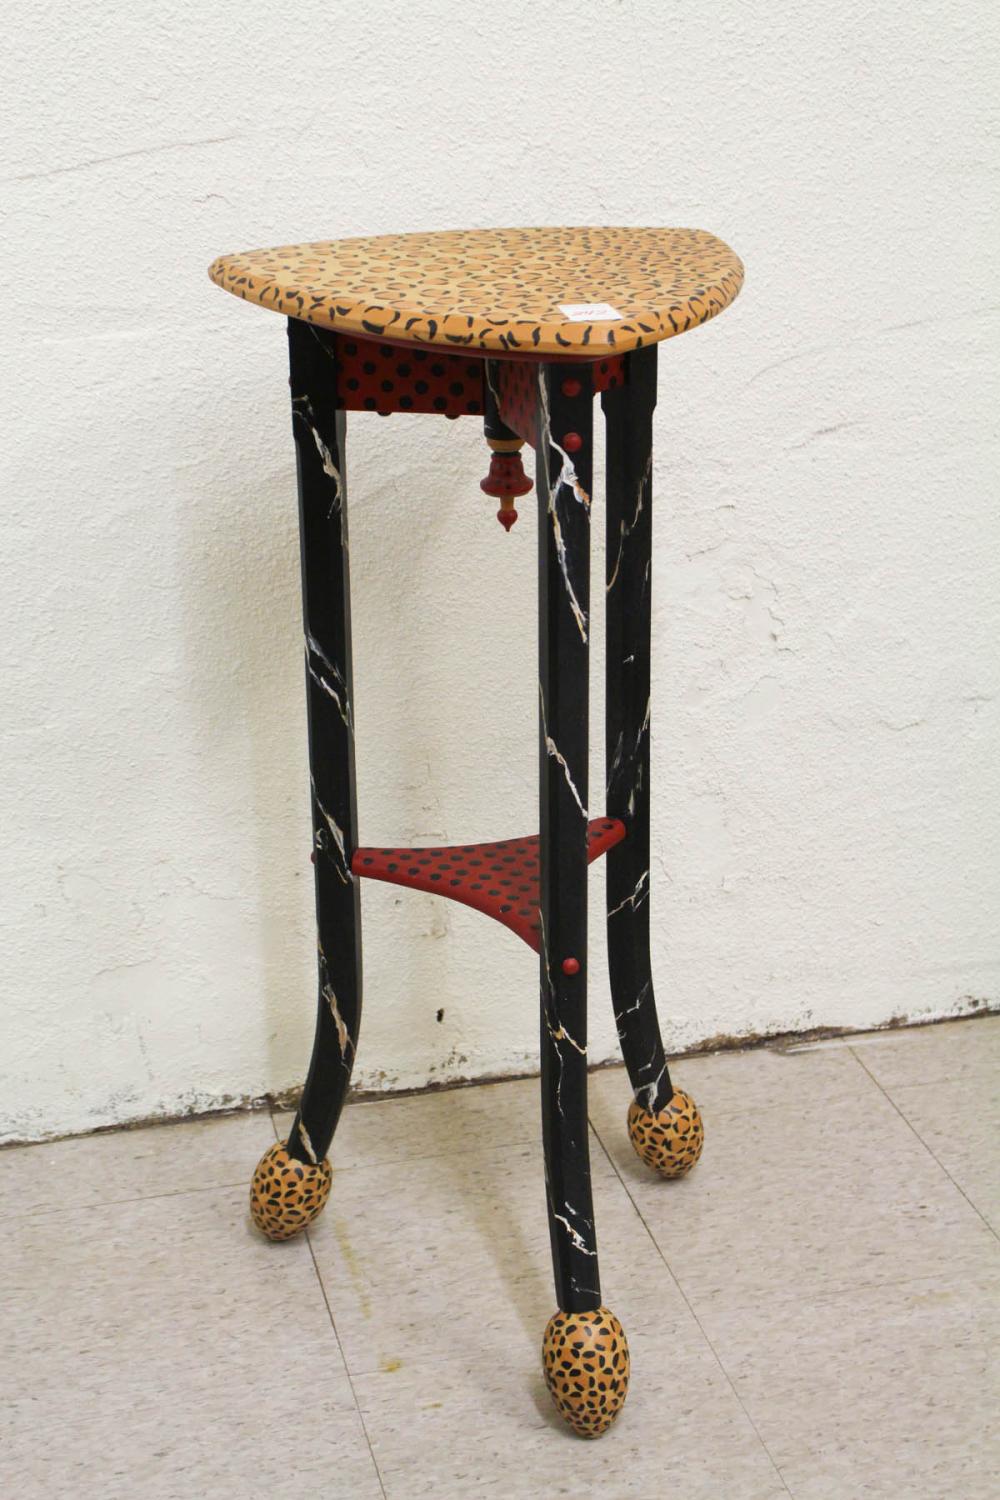 PAINT DECORATED WOOD PLANT STAND PAINT DECORATED 30a263